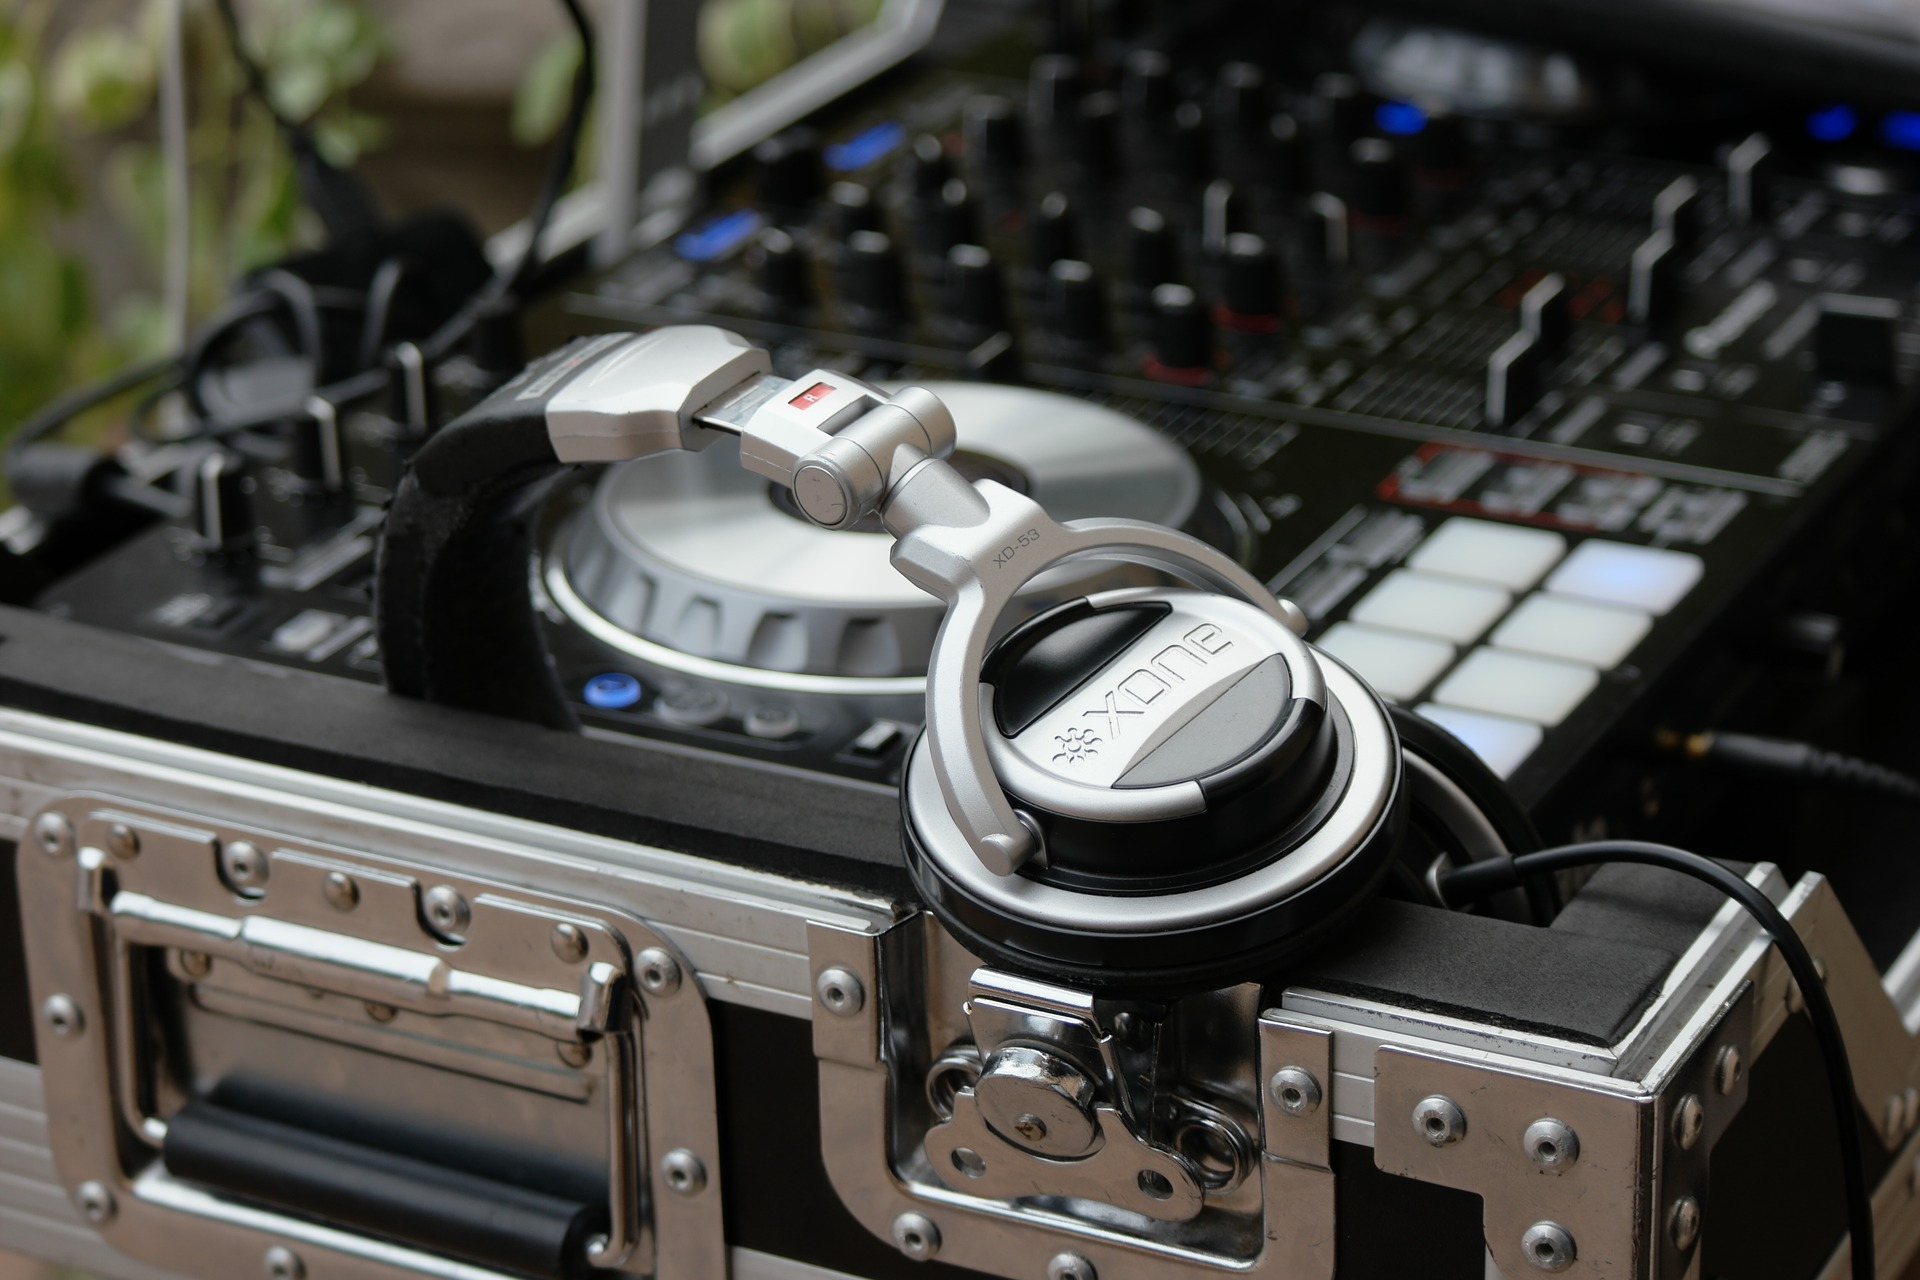 How to hire a wedding dj